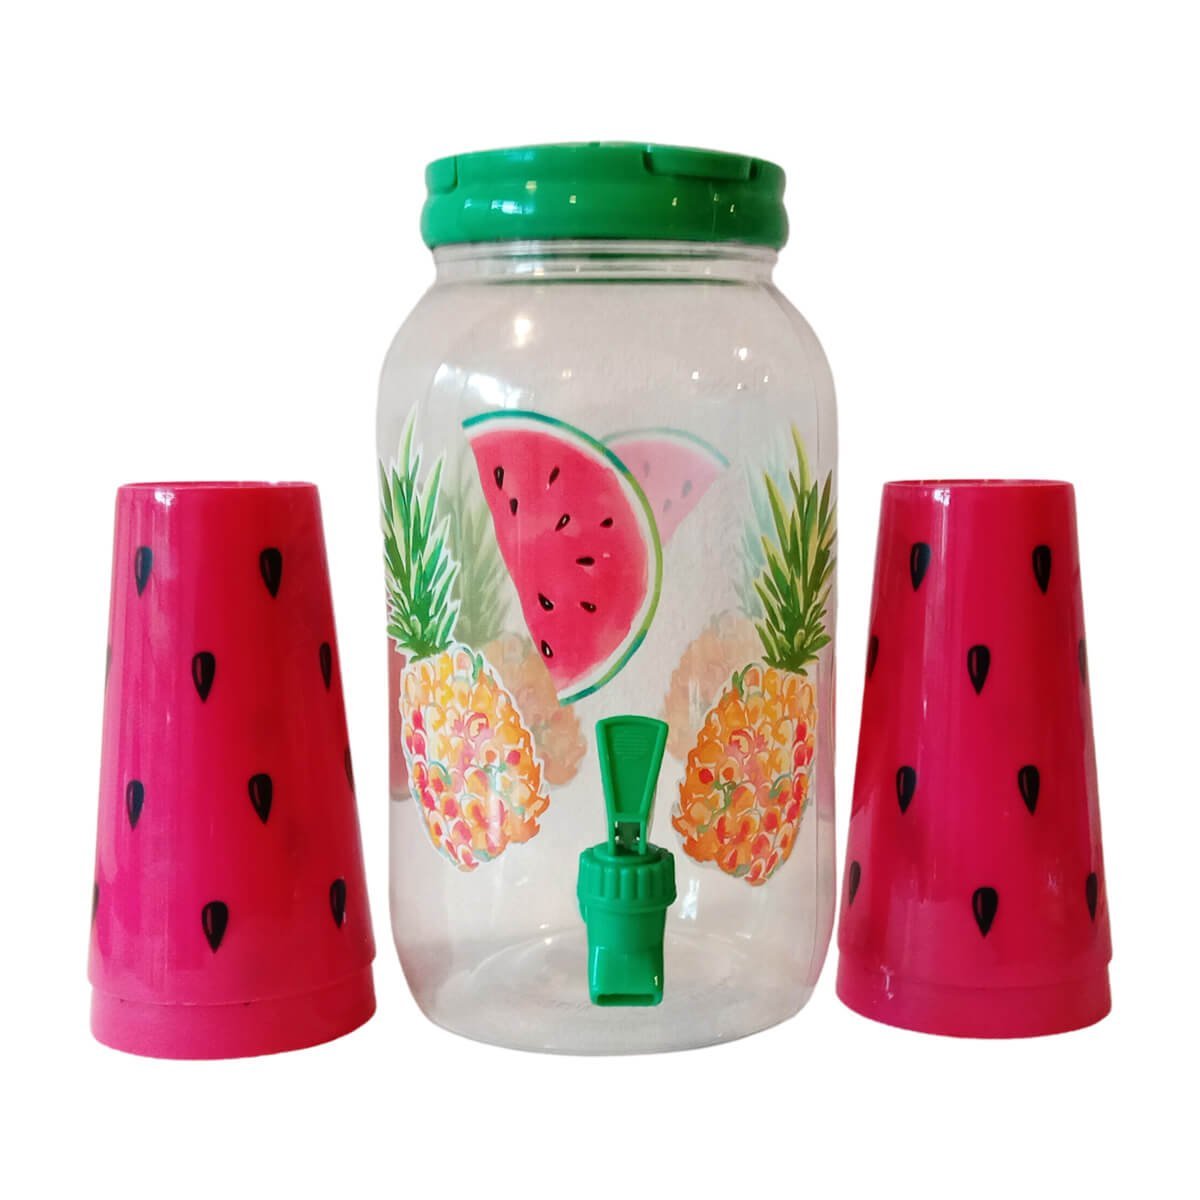 Watermelon Water Dispenser with 4 Glasses - Little Surprise BoxWatermelon Water Dispenser with 4 Glasses